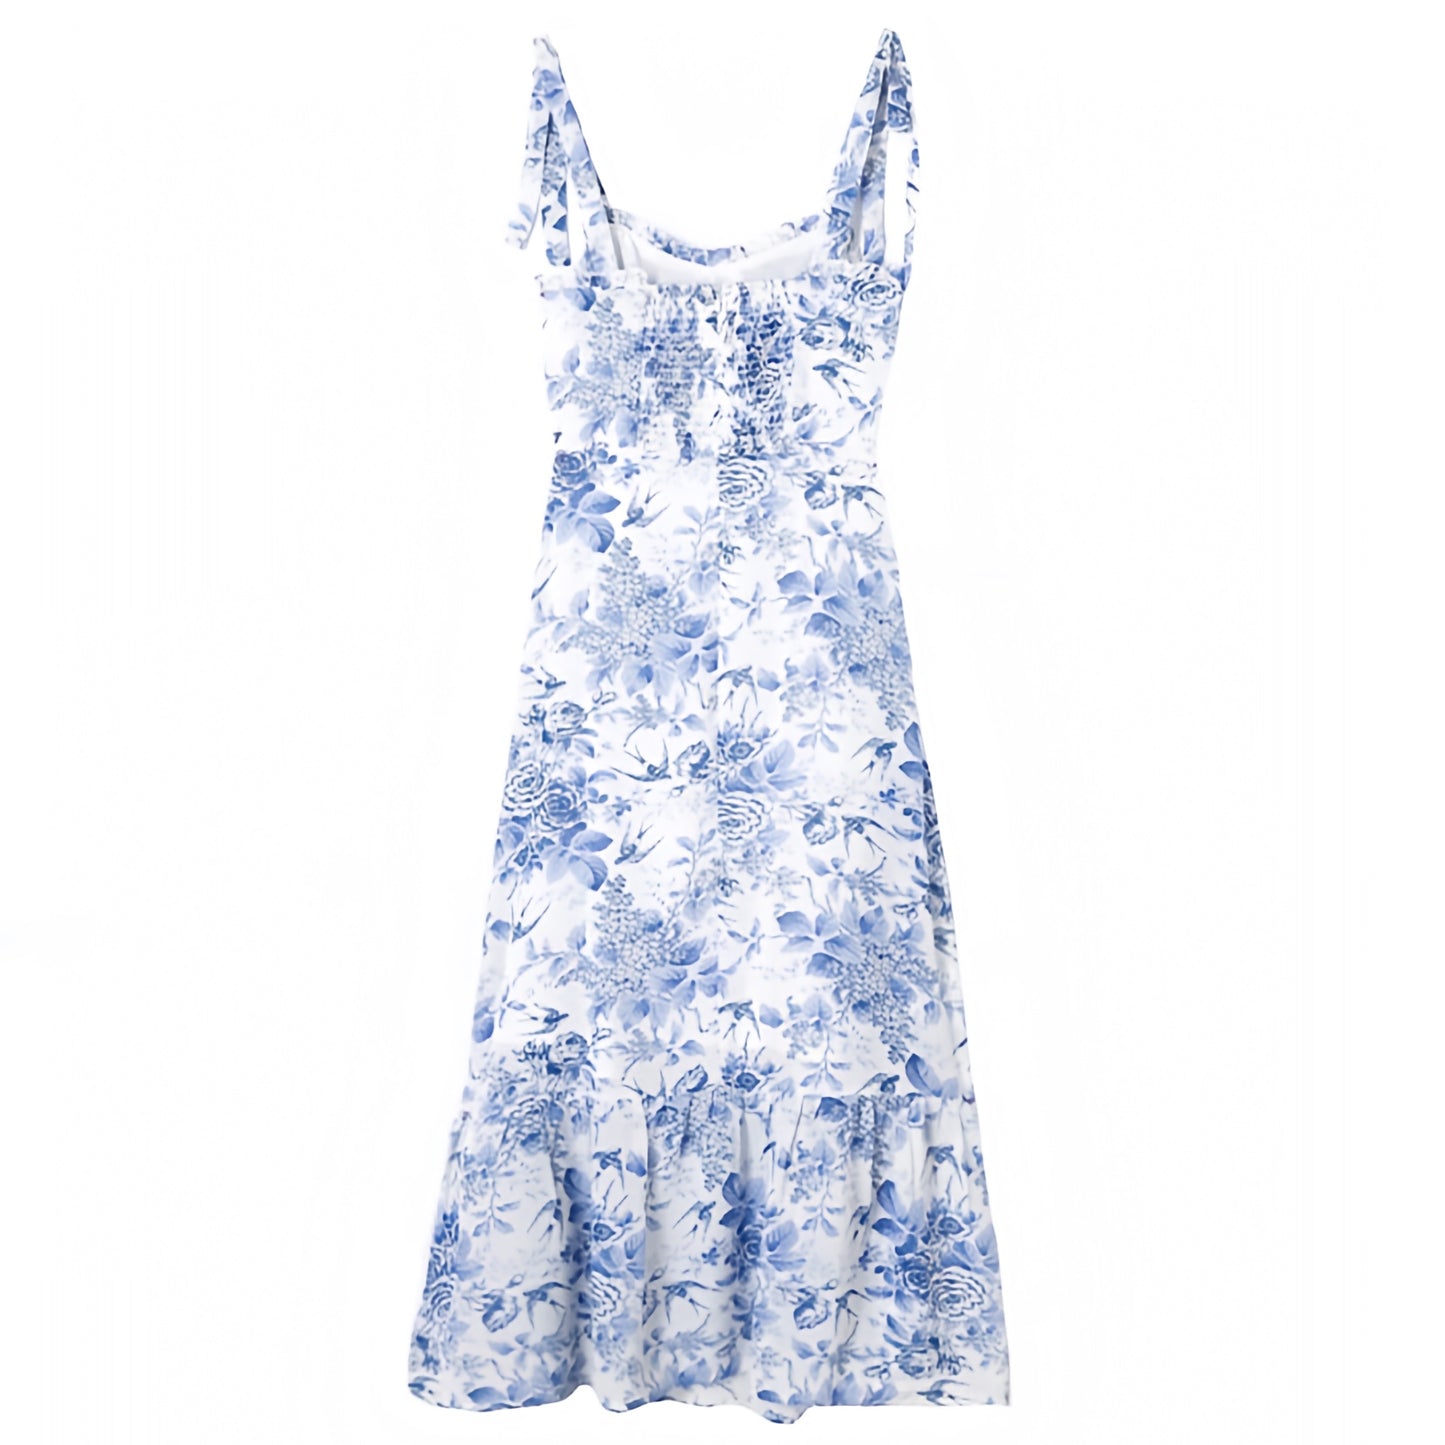 floral-print-light-blue-and-white-multi-color-flower-patterned-slim-fit-bodycon-corset-bustier-ruffle-trim-bow-string-tie-spaghetti-strap-sweetheart-neckline-sleeveless-tiered-flowy-midi-long-maxi-dress-evening-gown-women-ladies-teens-tweens-chic-trendy-spring-2024-summer-elegant-casual-semi-formal-classy-feminine-prom-party-wedding-guest-debutante-homecoming-dance-preppy-style-beach-wear-vacation-sundress-coastal-granddaughter-altard-state-hill-house-revolve-reformation-loveshackfancy-zara-dupe